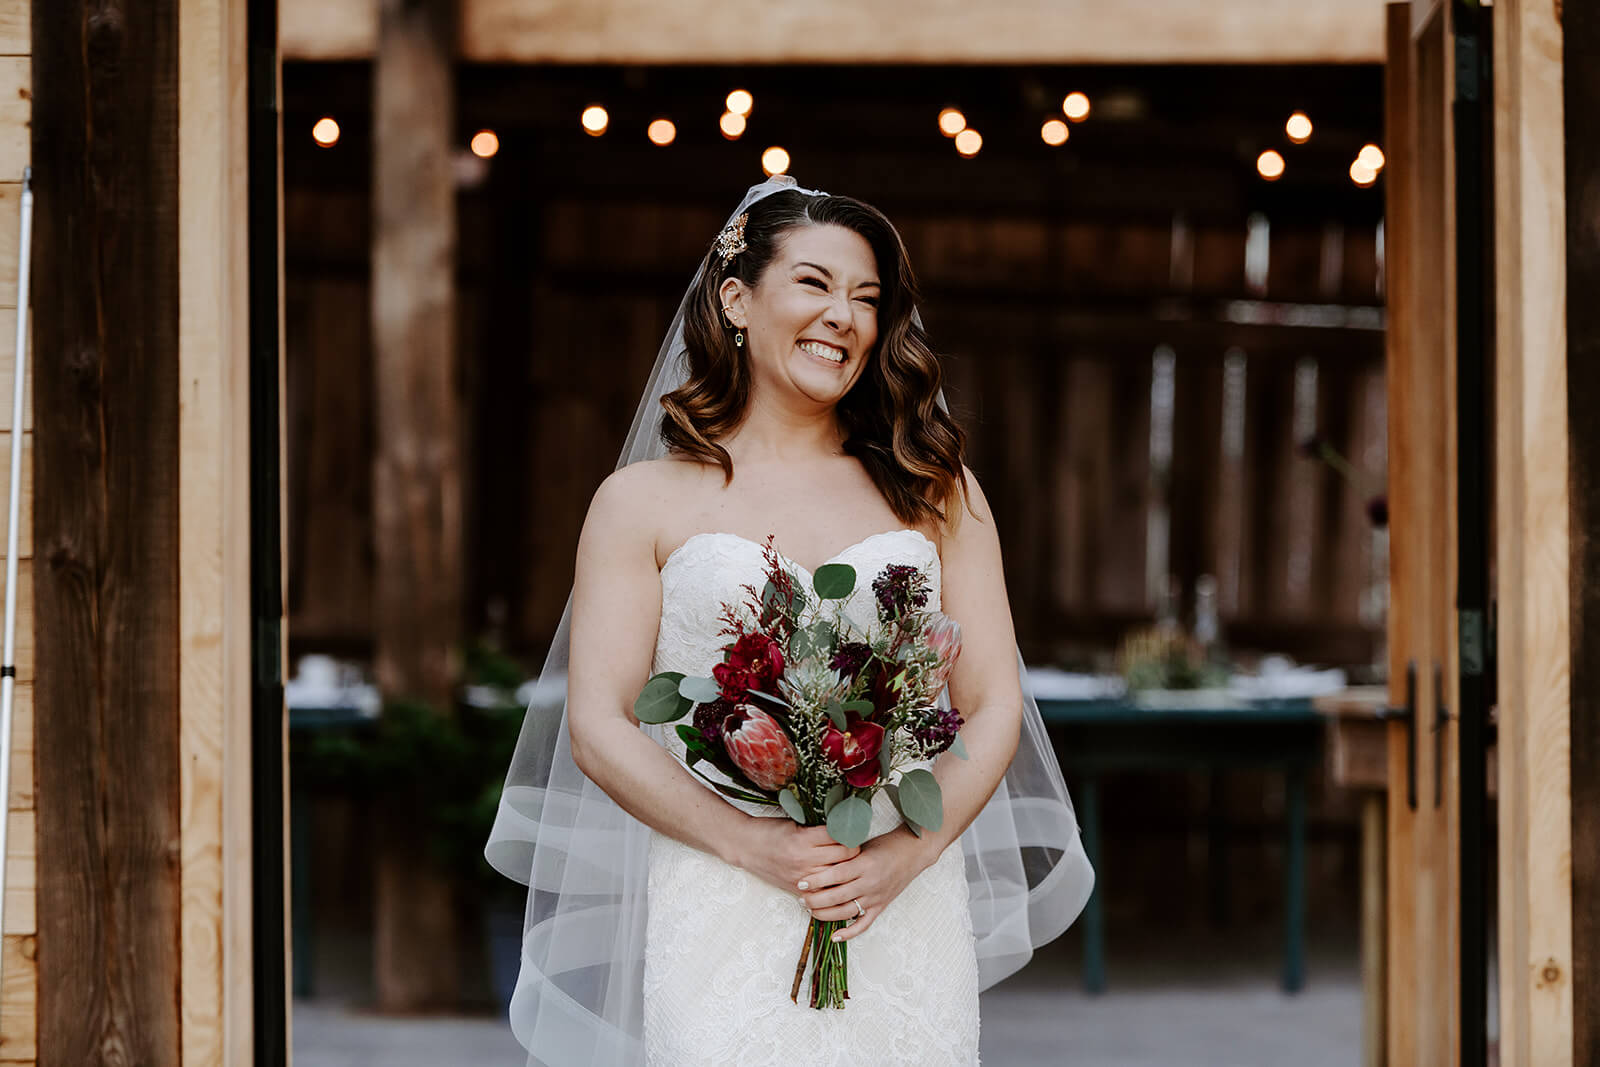 “Let Me Sweat The Small Stuff, While You Soak in That ‘Just Married’ Feeling”: Events by Shannon Offers Knowledge, Passion, and Empathy as You Plan Your Wedding